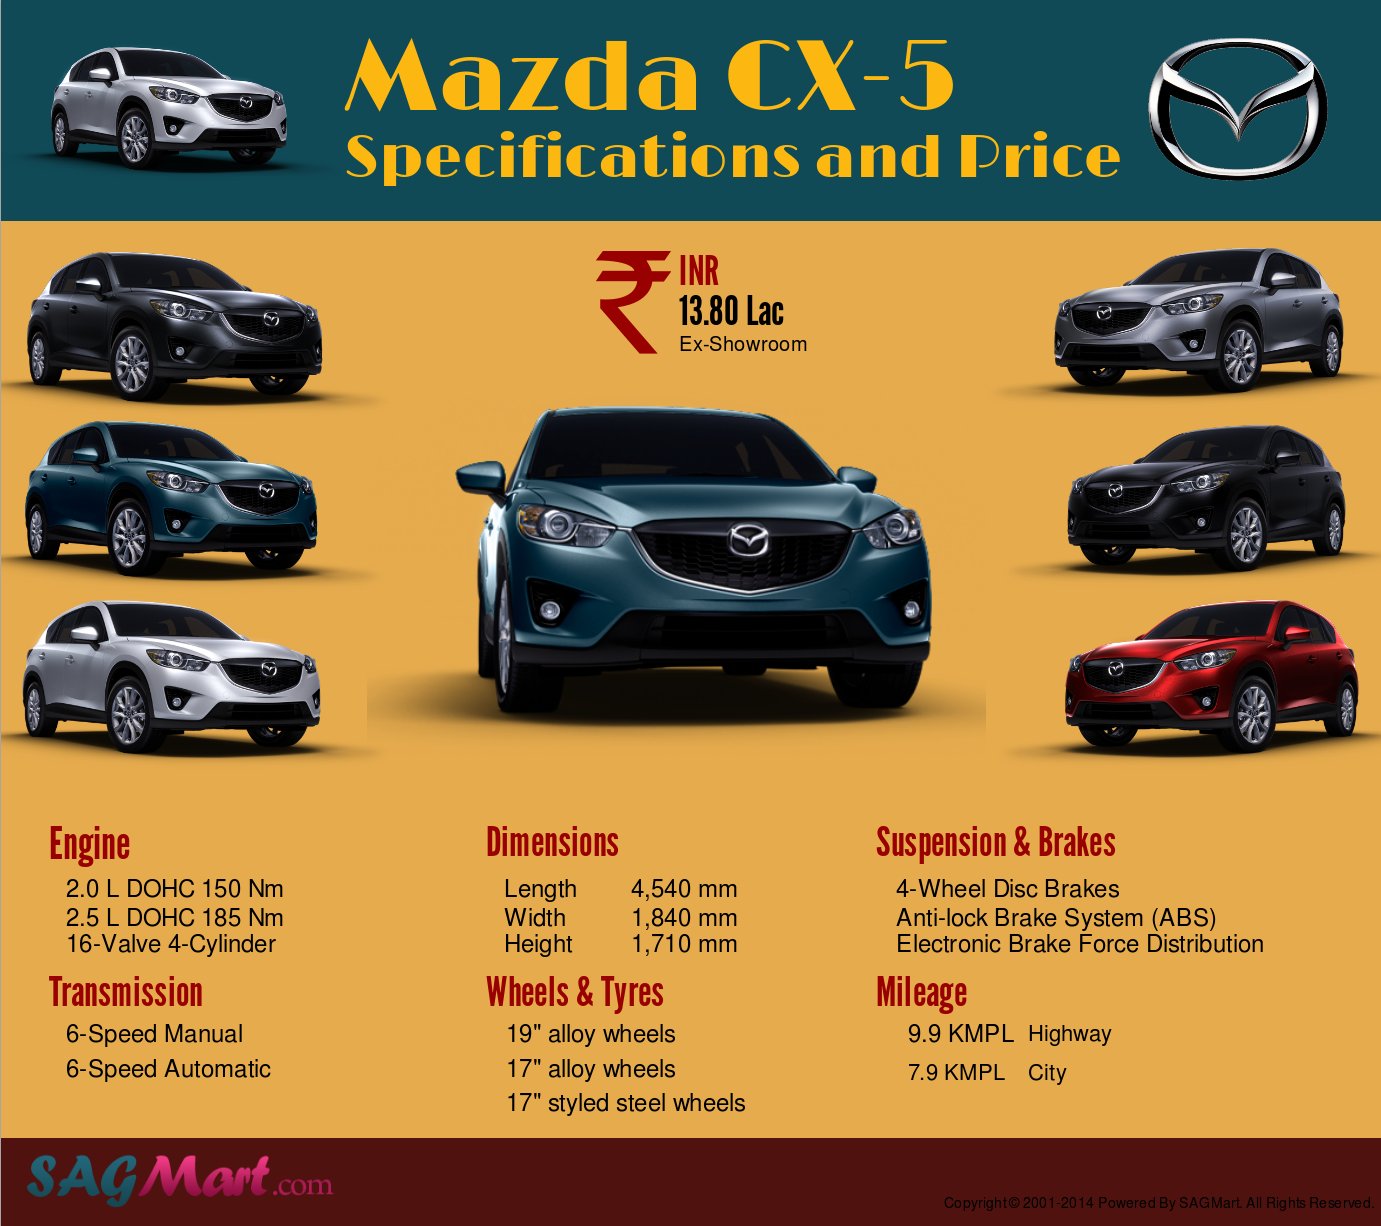 Mazda Cx 5 Specifications And Price Infographic Sagmart